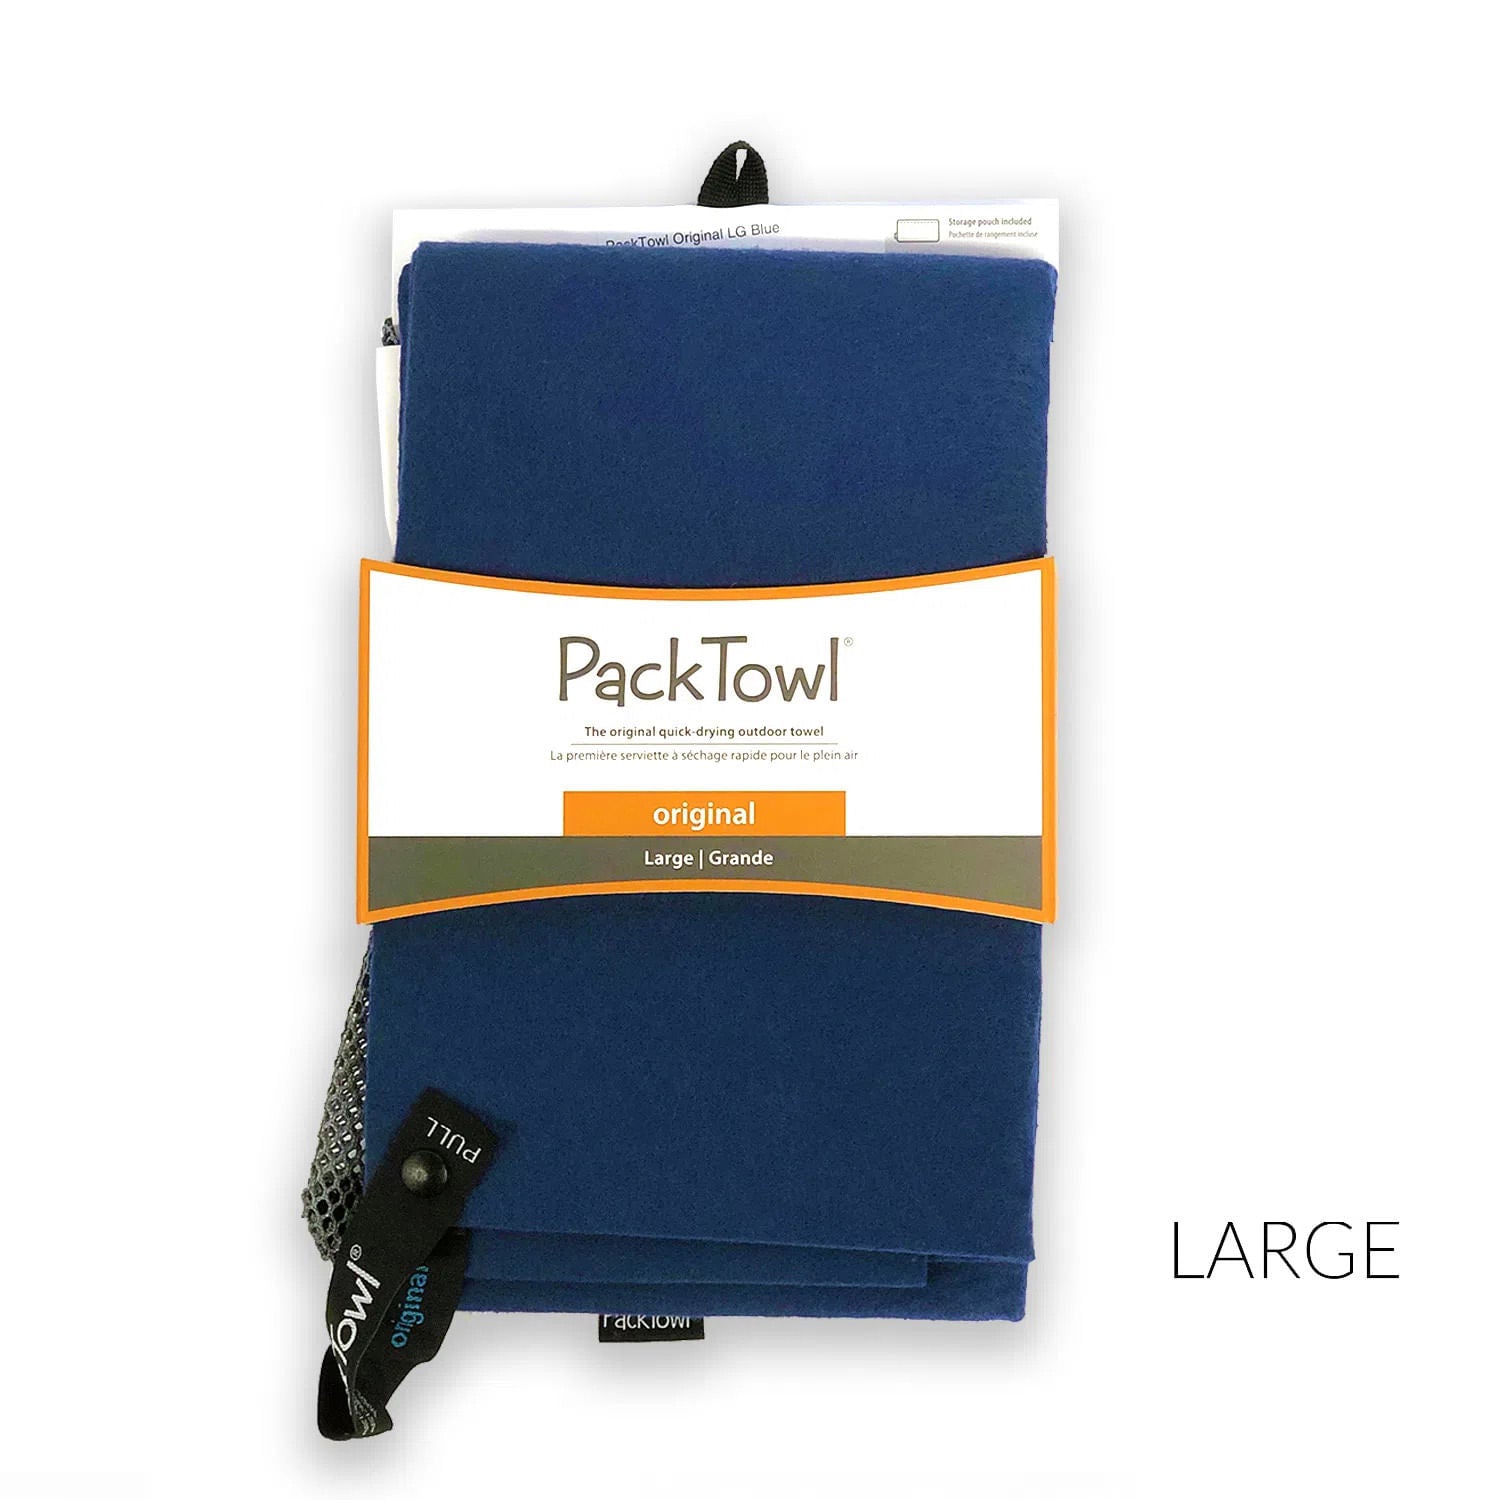 PackTowl Travel Towels